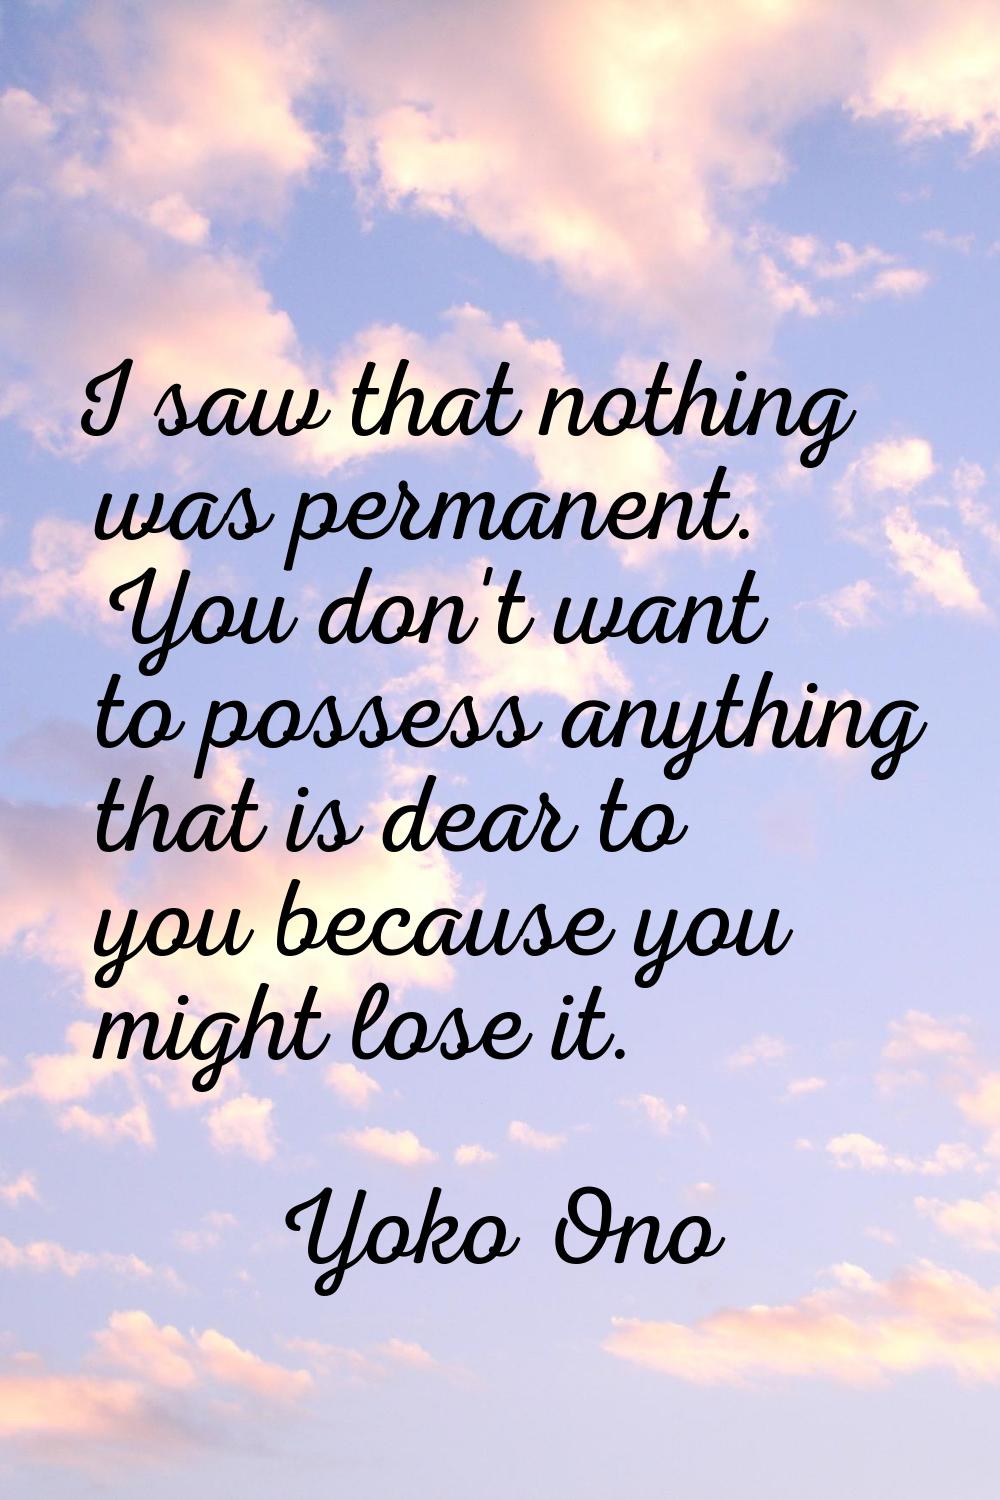 I saw that nothing was permanent. You don't want to possess anything that is dear to you because yo